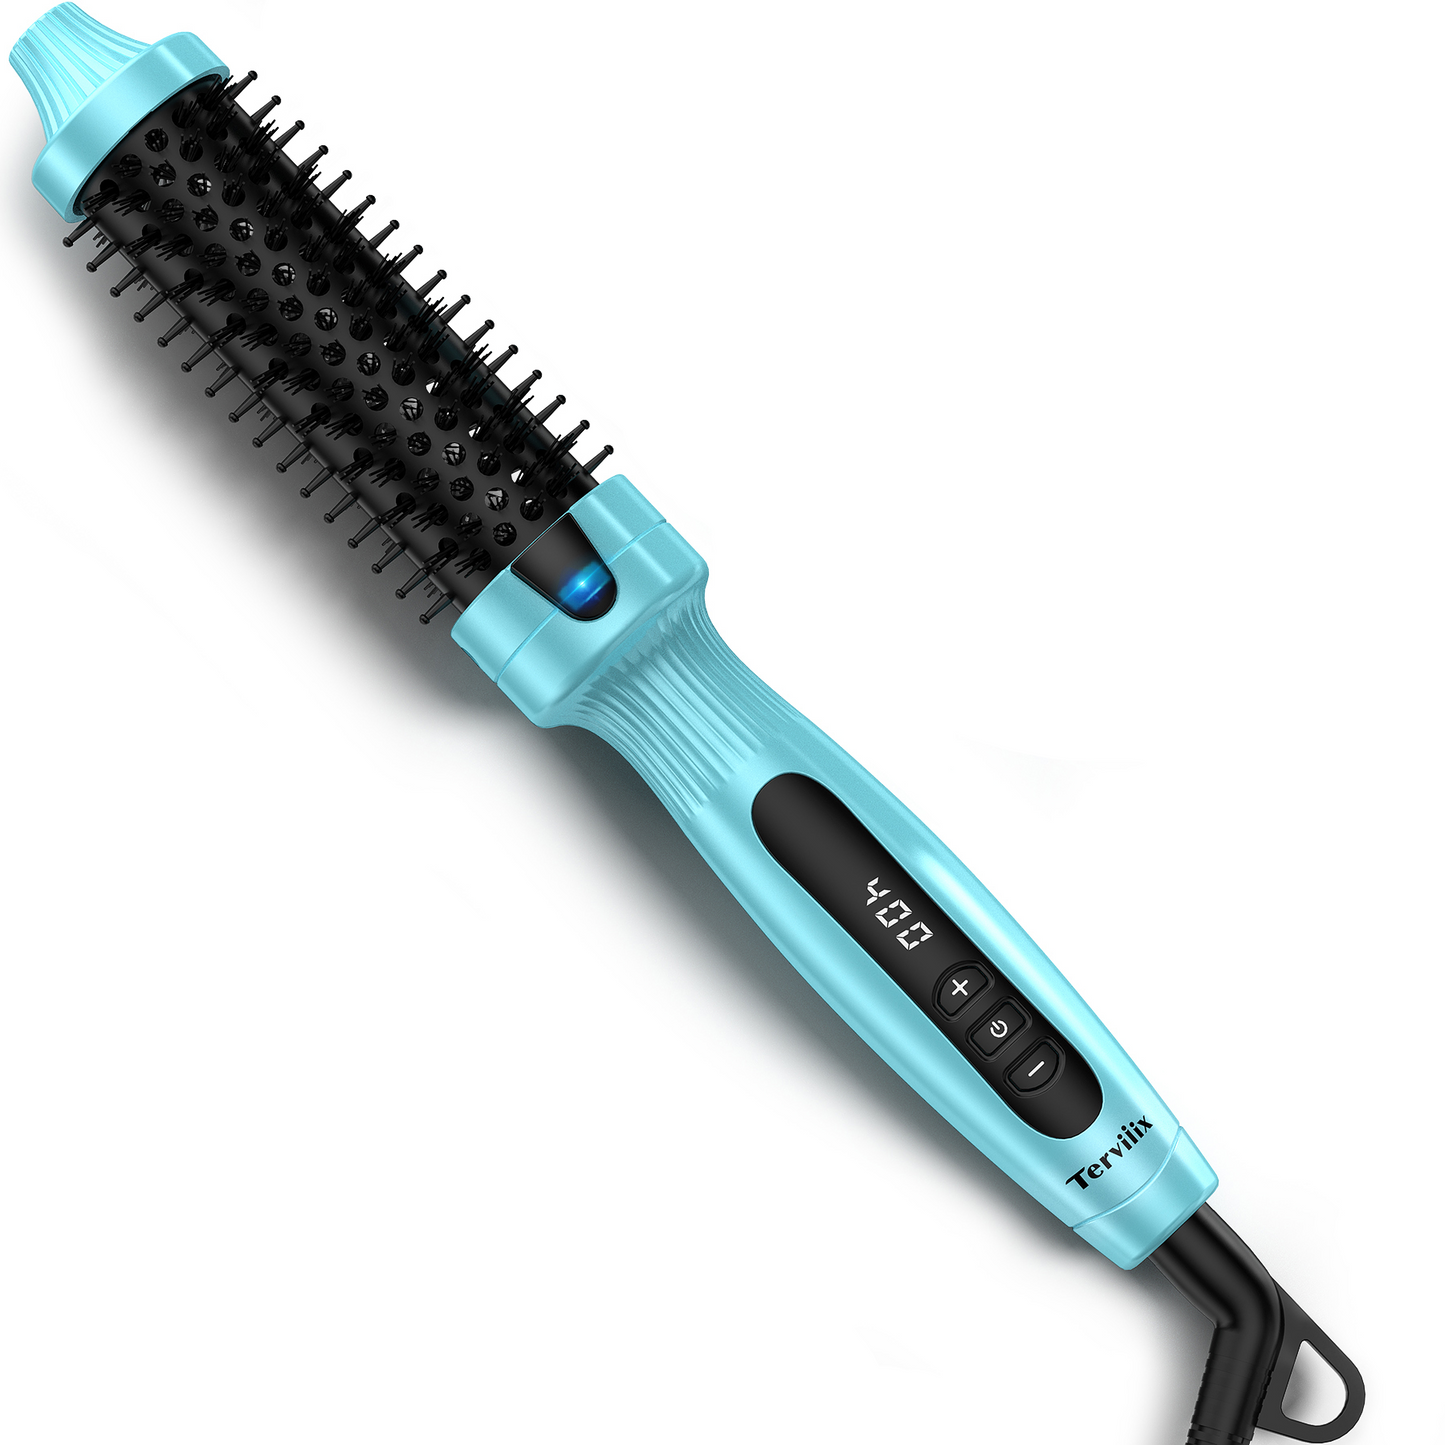 Terviiix 1.5" Thermal Ionic Brush Heated for Hair Curling, Gold